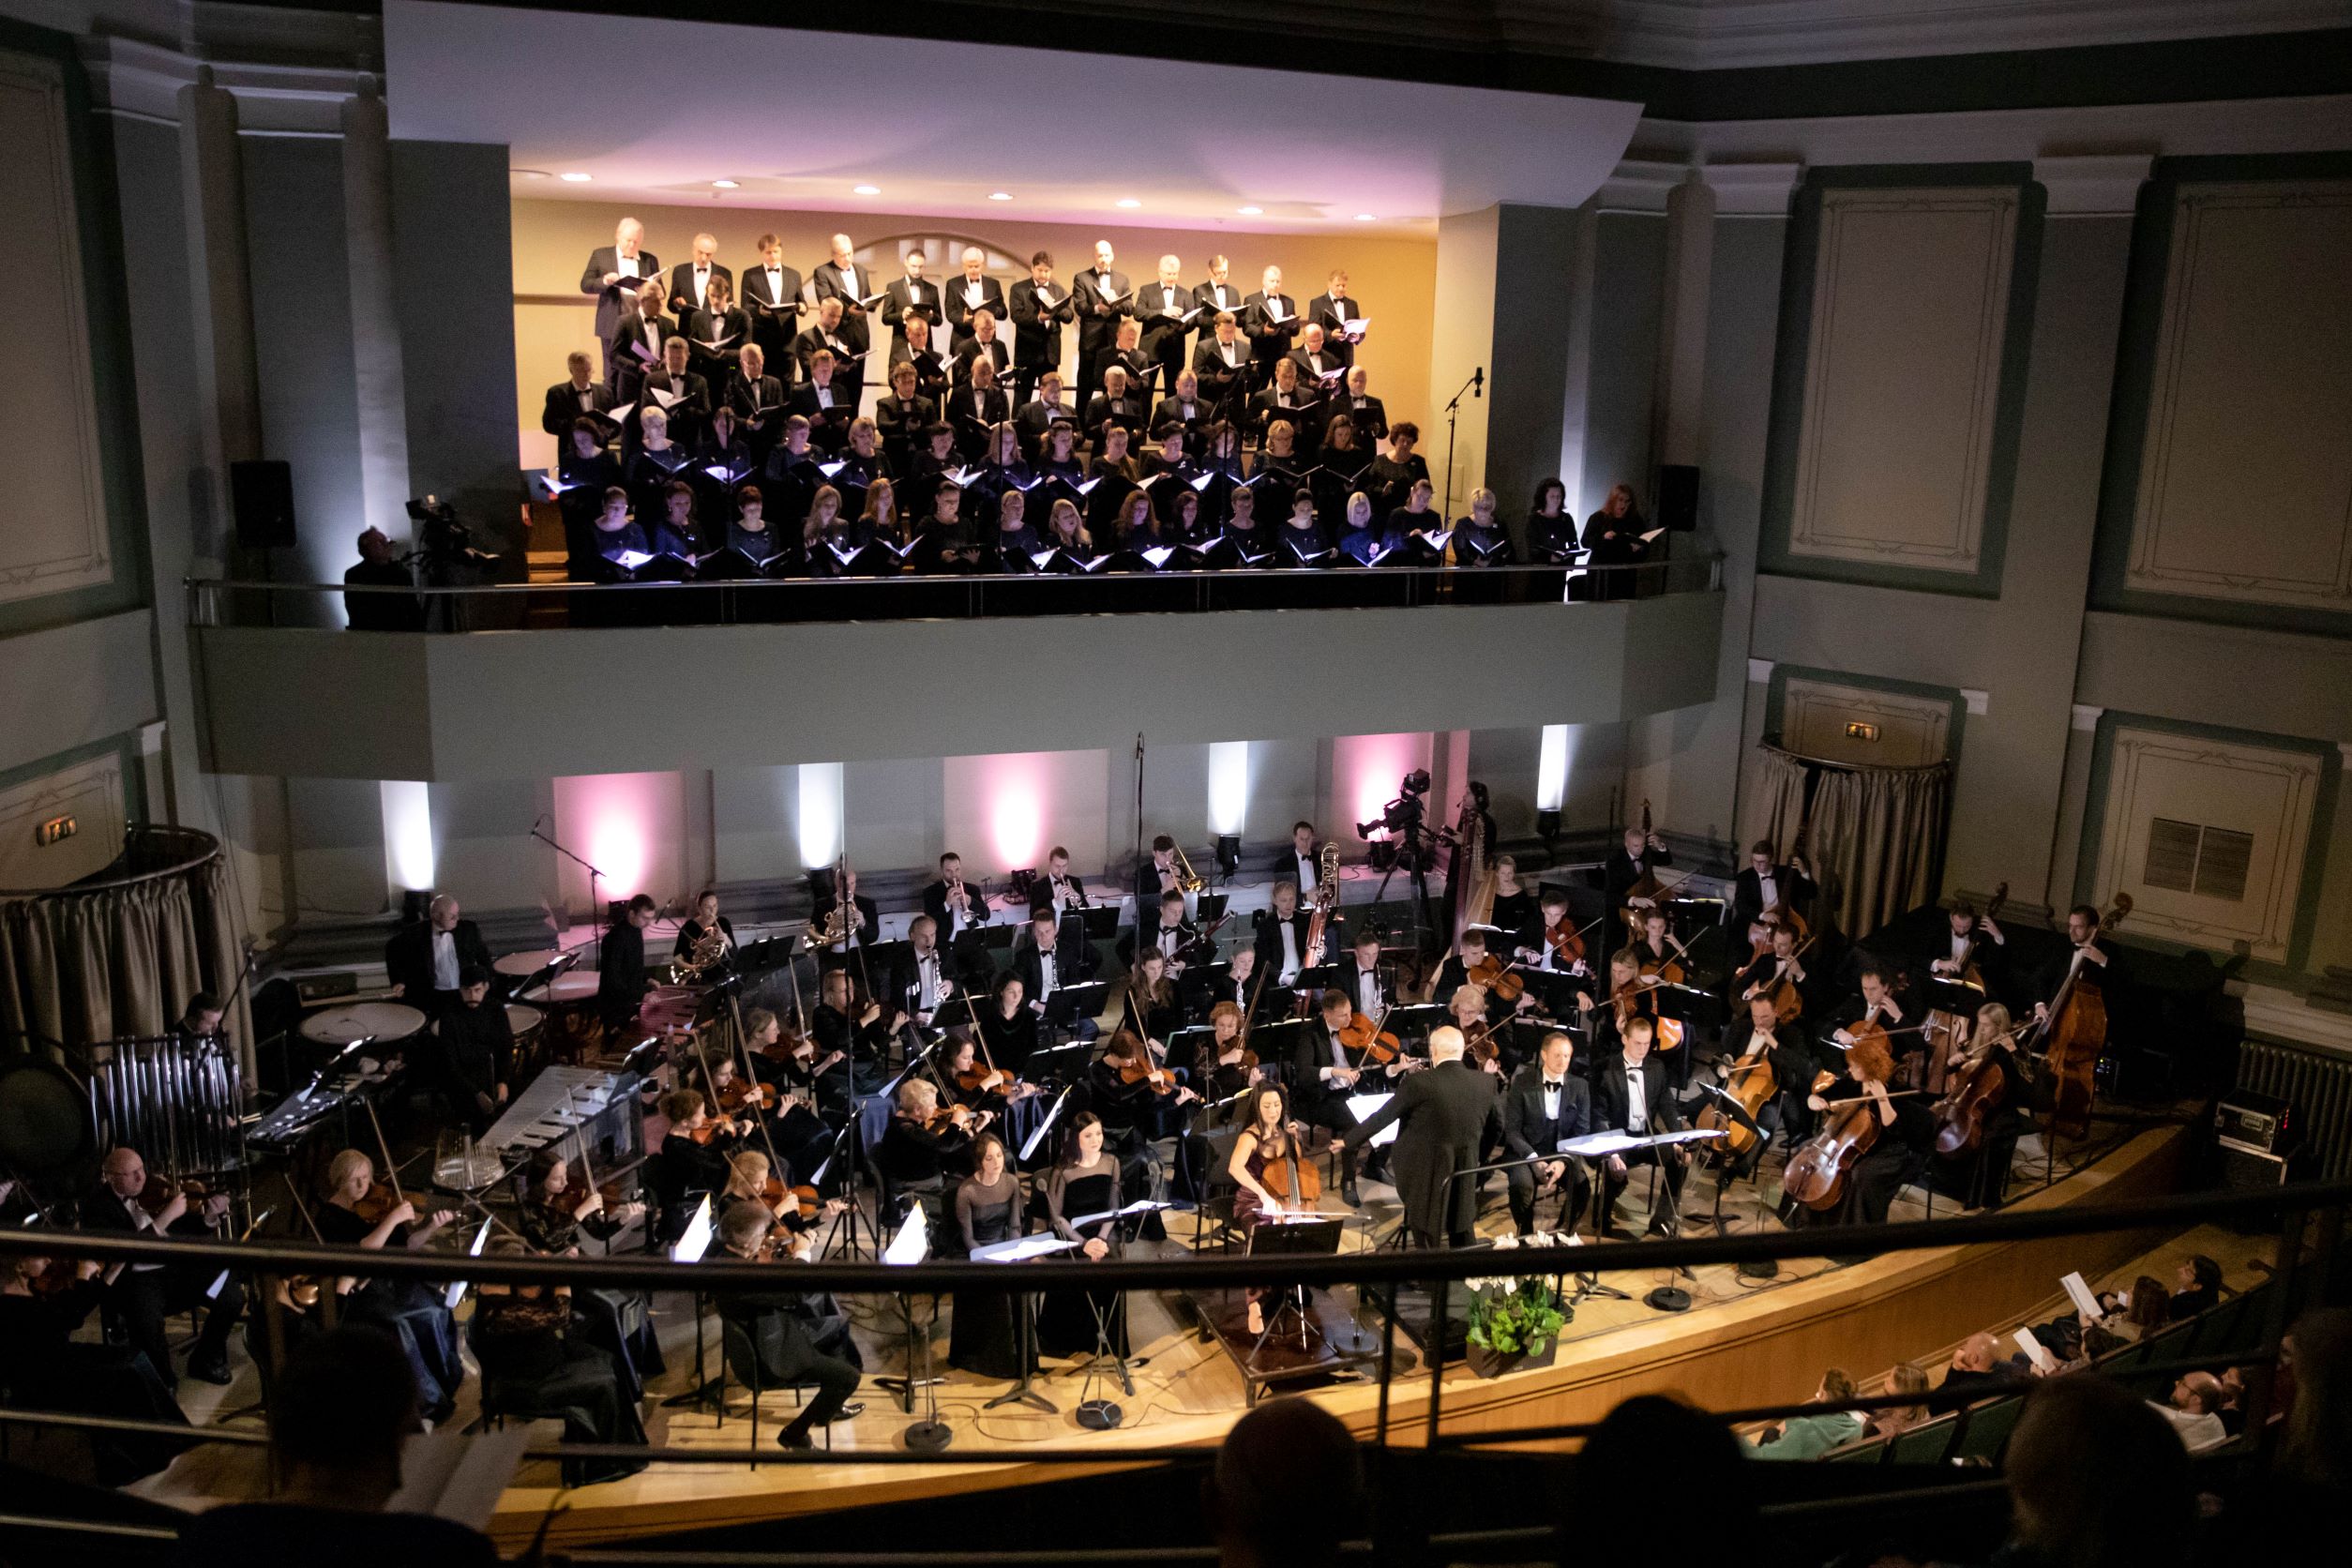 "Vessels of Light Symphony debuts at the Kaunas Concert Hall